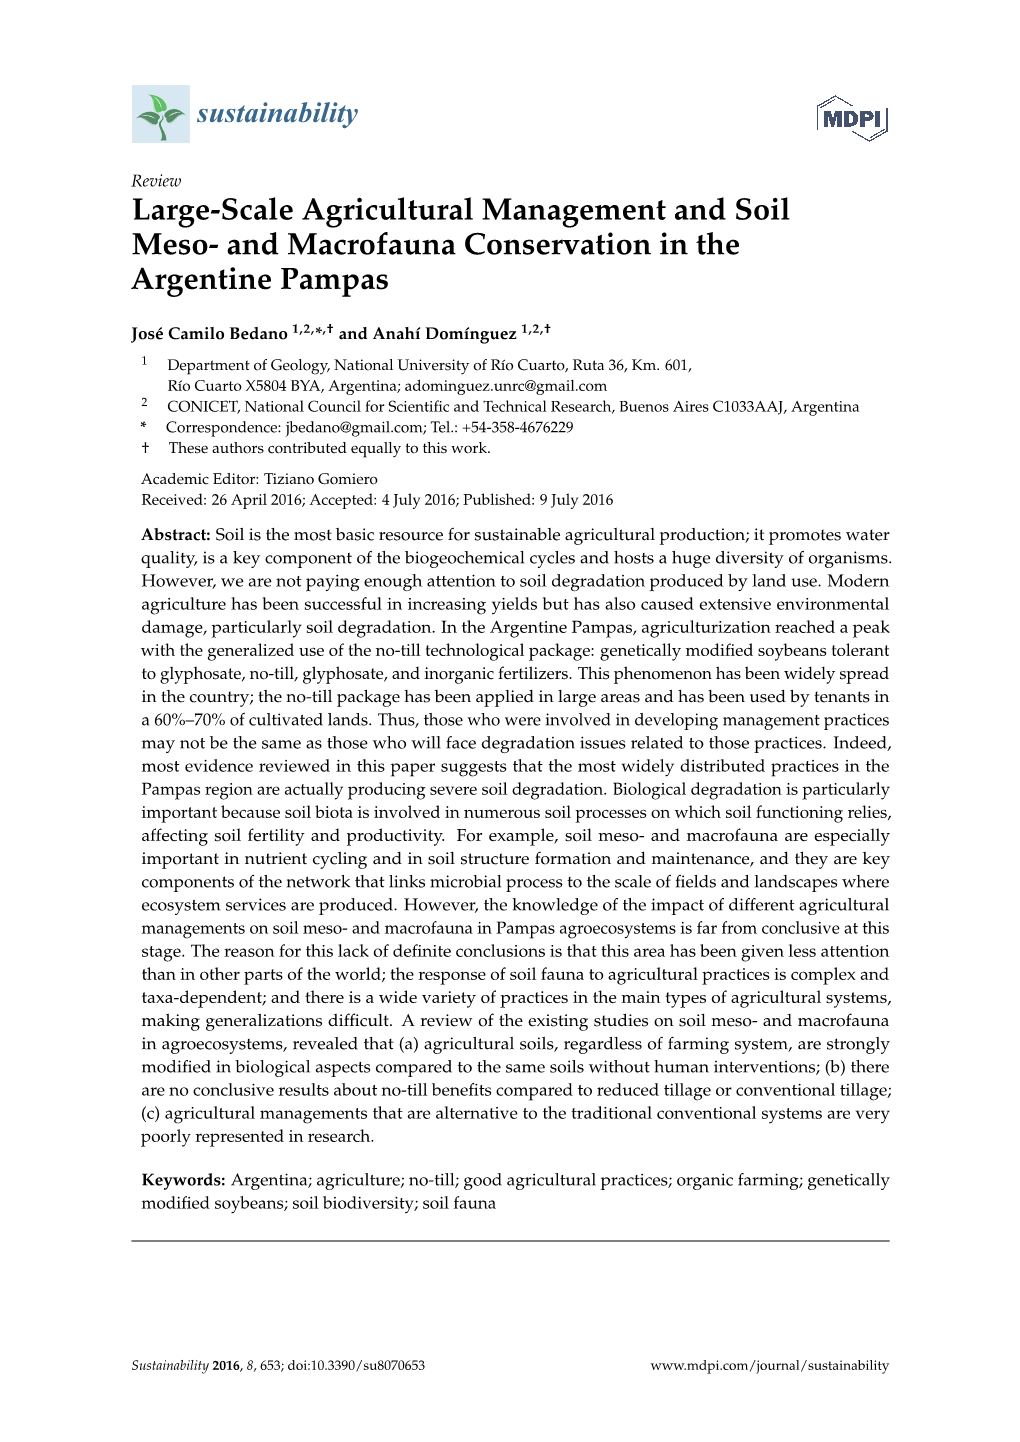 Large-Scale Agricultural Management and Soil Meso- and Macrofauna Conservation in the Argentine Pampas